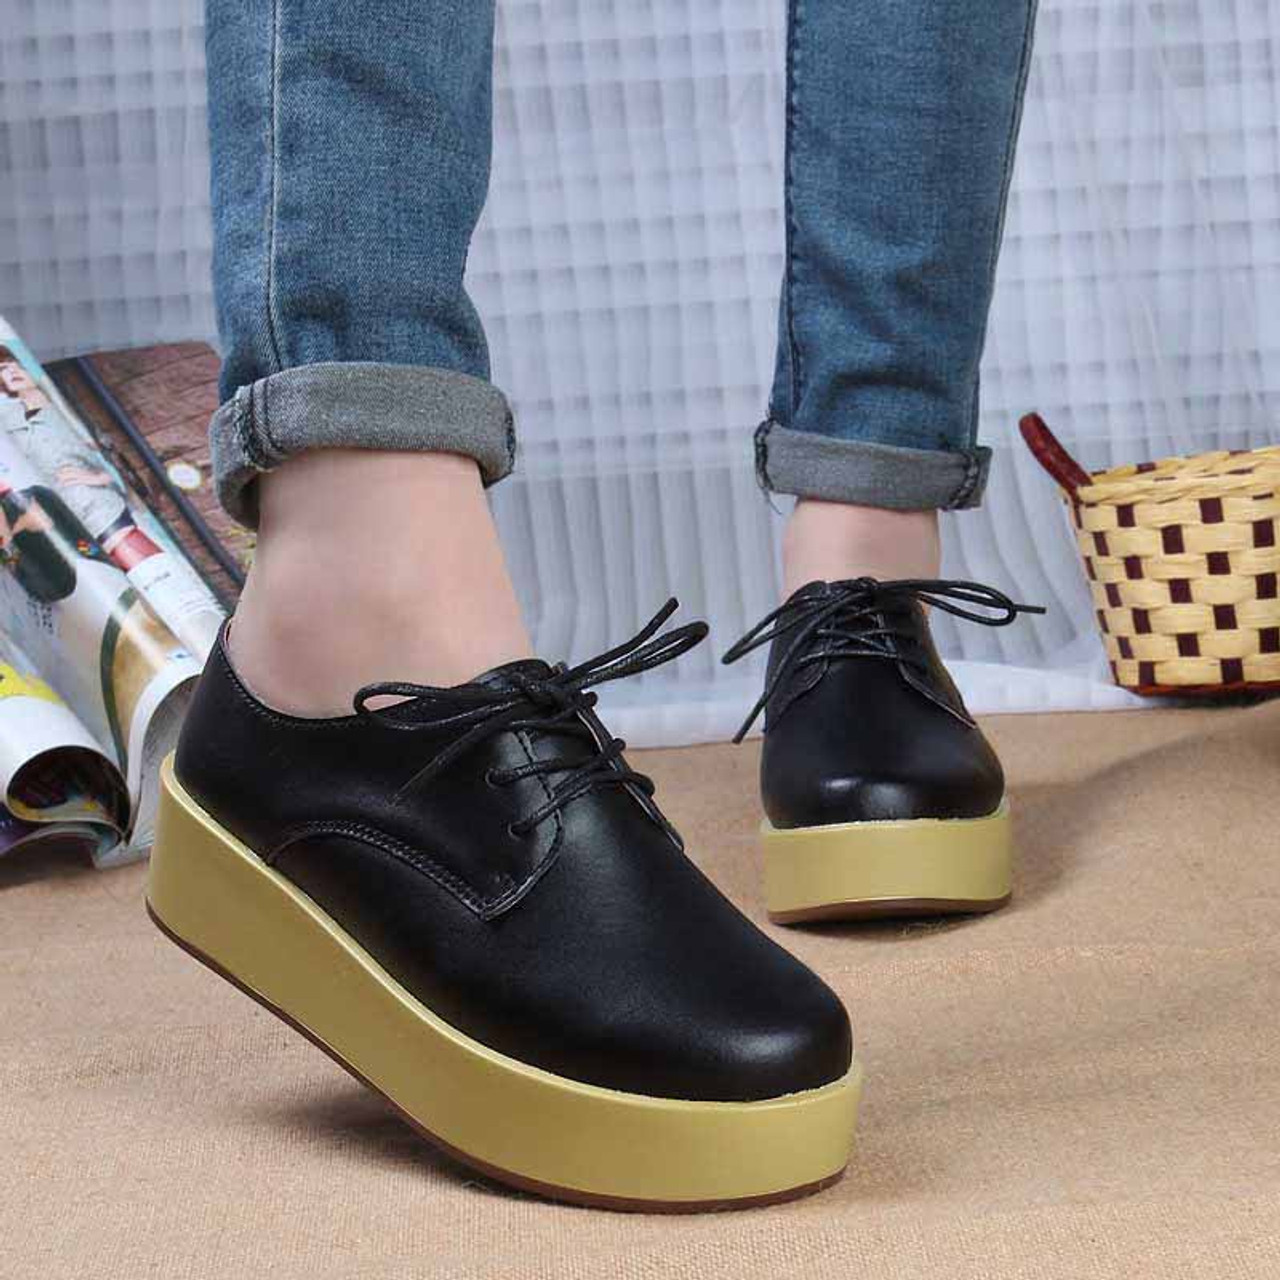 Black leather sewing thread lace up platform shoe | Free Shipping ...